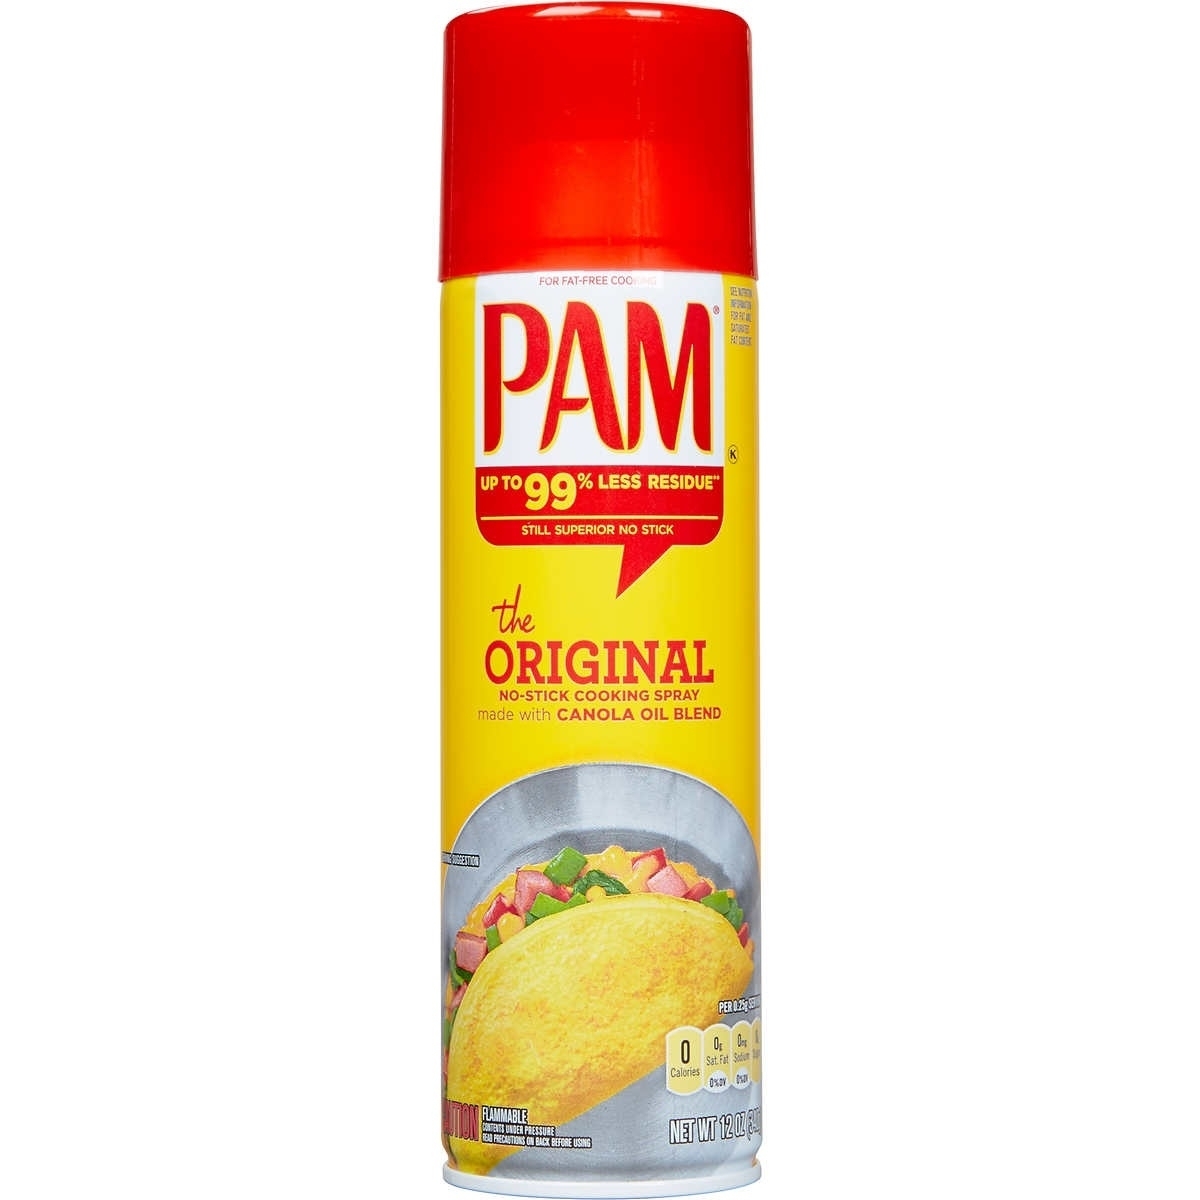 Pam Original Non-Stick Cooking Spray 12 Ounce (Pack of 2)